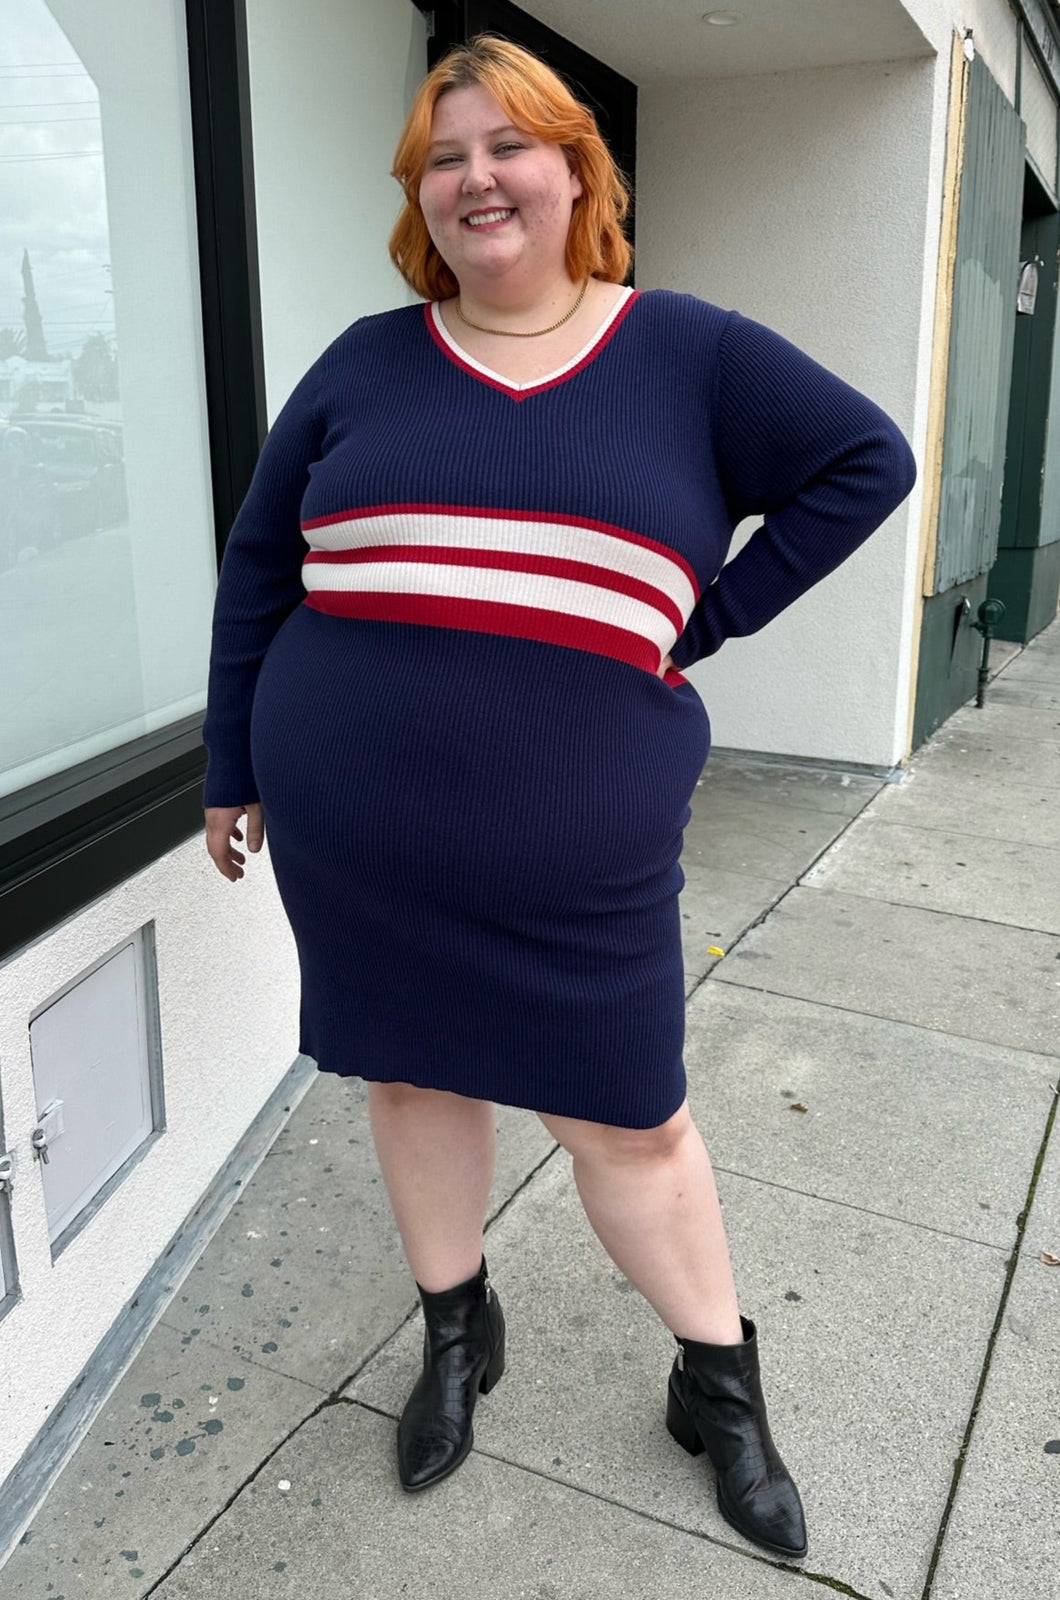 Full-body front view of a size 22/24 Eloquii x Katie Sturino navy blue ribbed knit sweater dress with red and white varisty stripes and a red and white v-neck stripe styled with black boots on a size 22/24 model. The photo is taken outside in natural lighting.